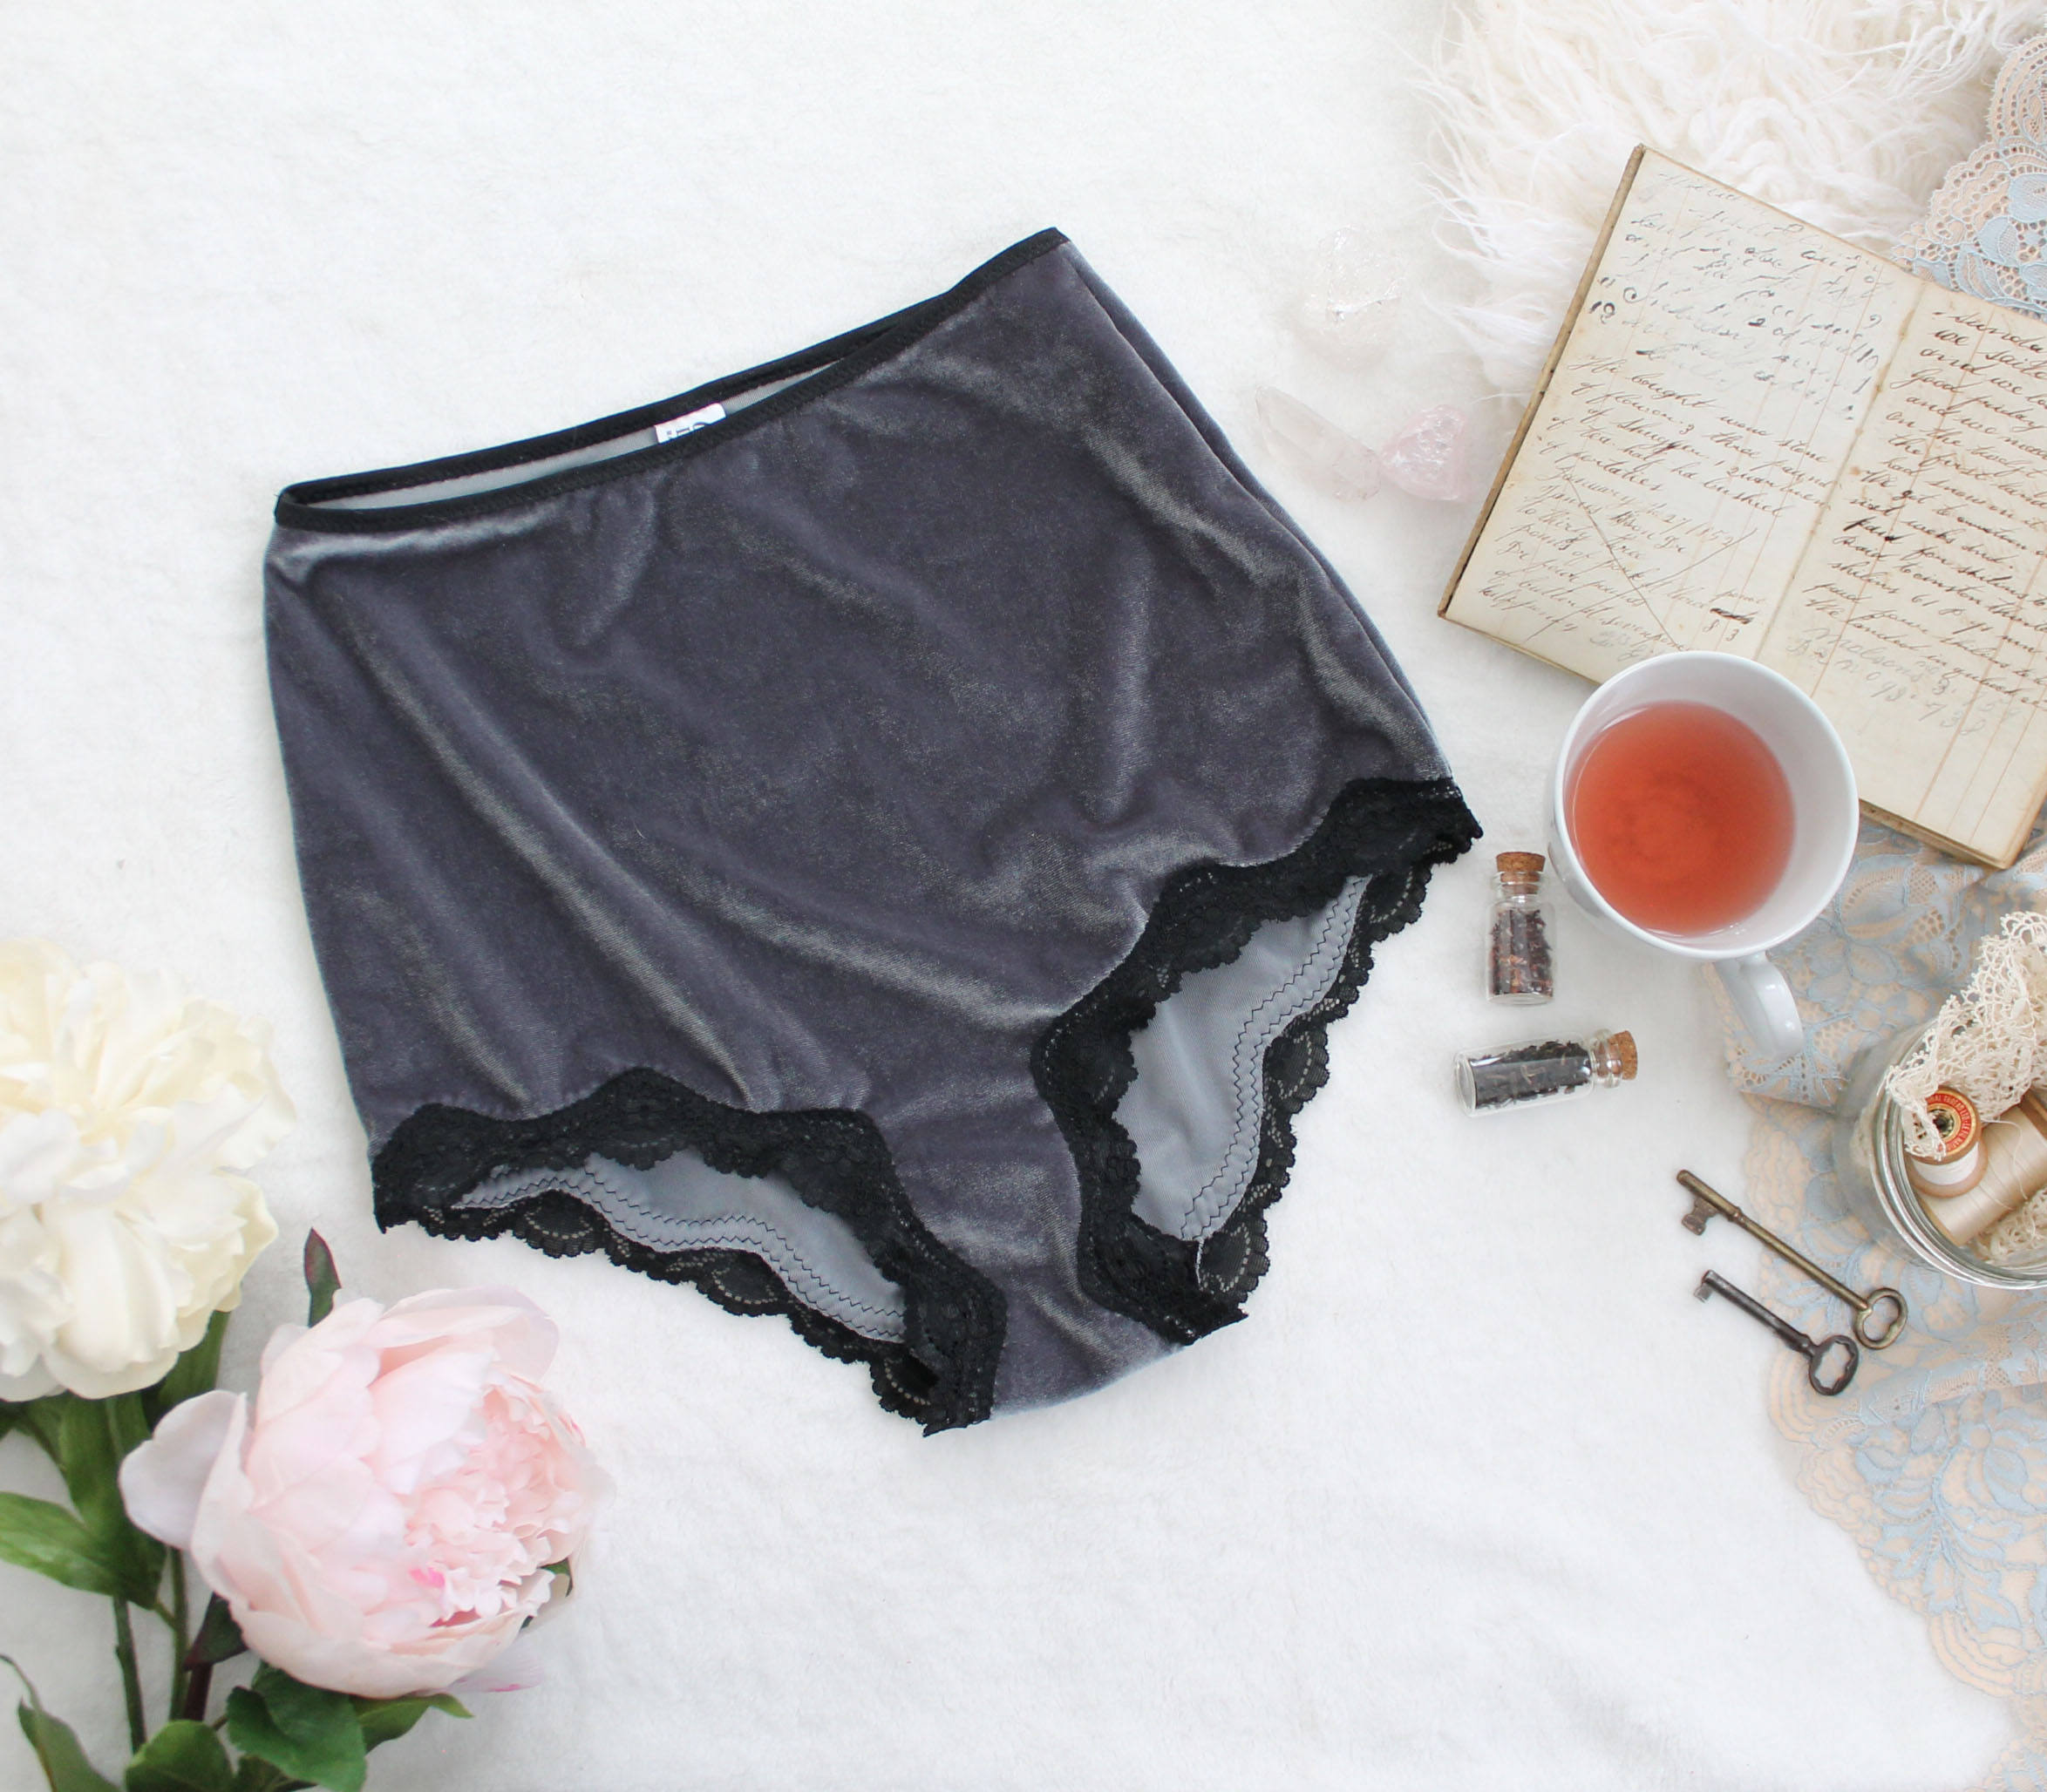 Charcoal Gray 'Elixir' Velvet and Lace Hig Waist Panties Handmade Luxurious Undies Made to Order